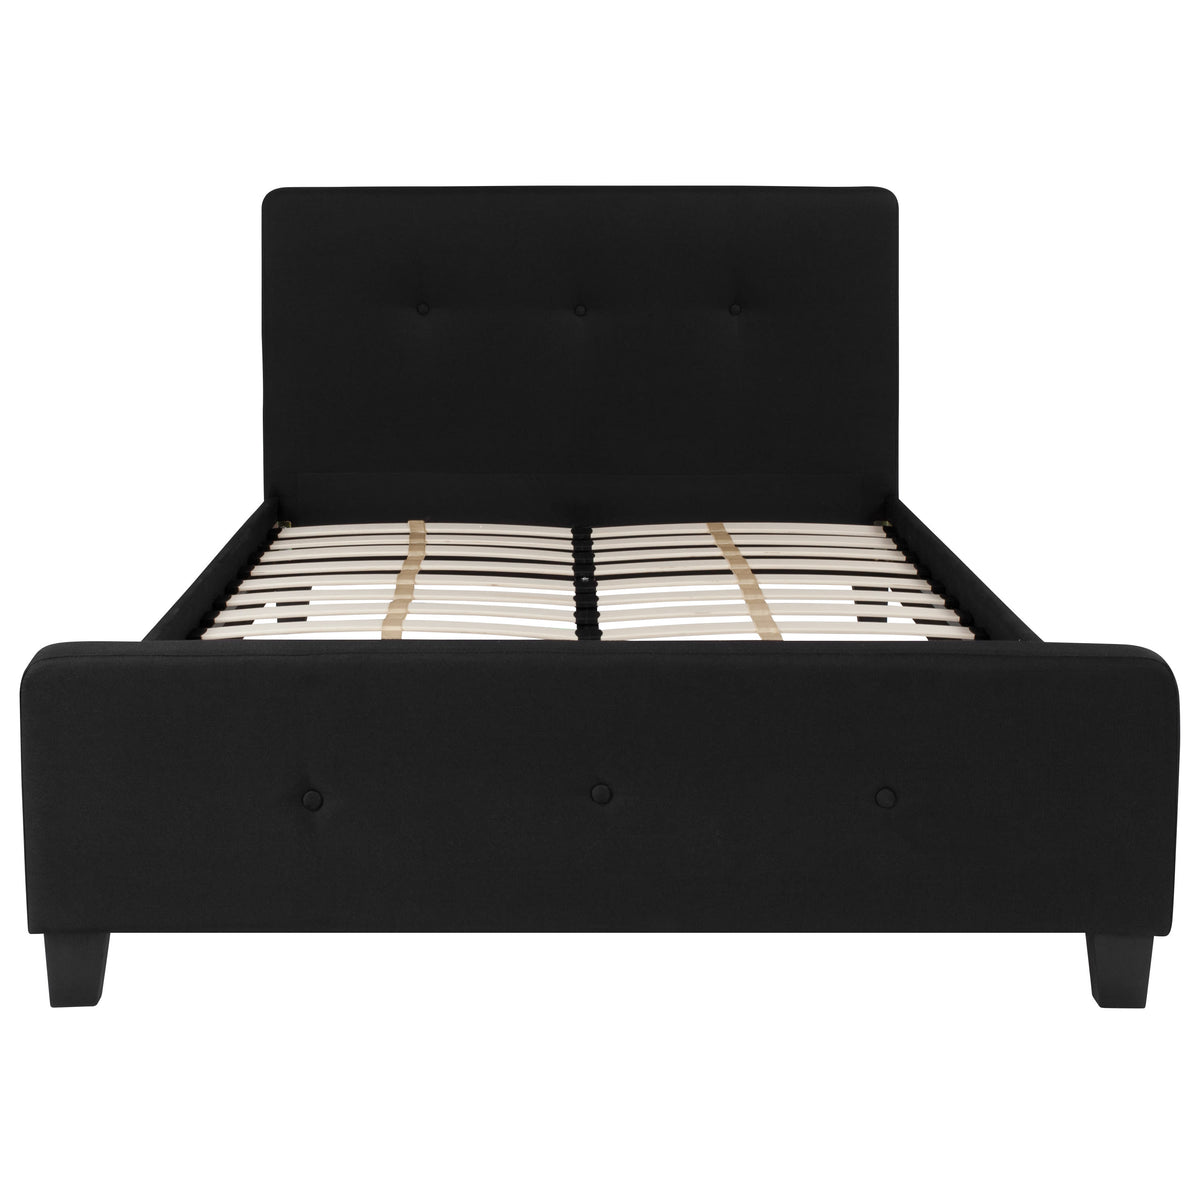 Black,Full |#| Full Size Three Button Tufted Upholstered Platform Bed in Black Fabric